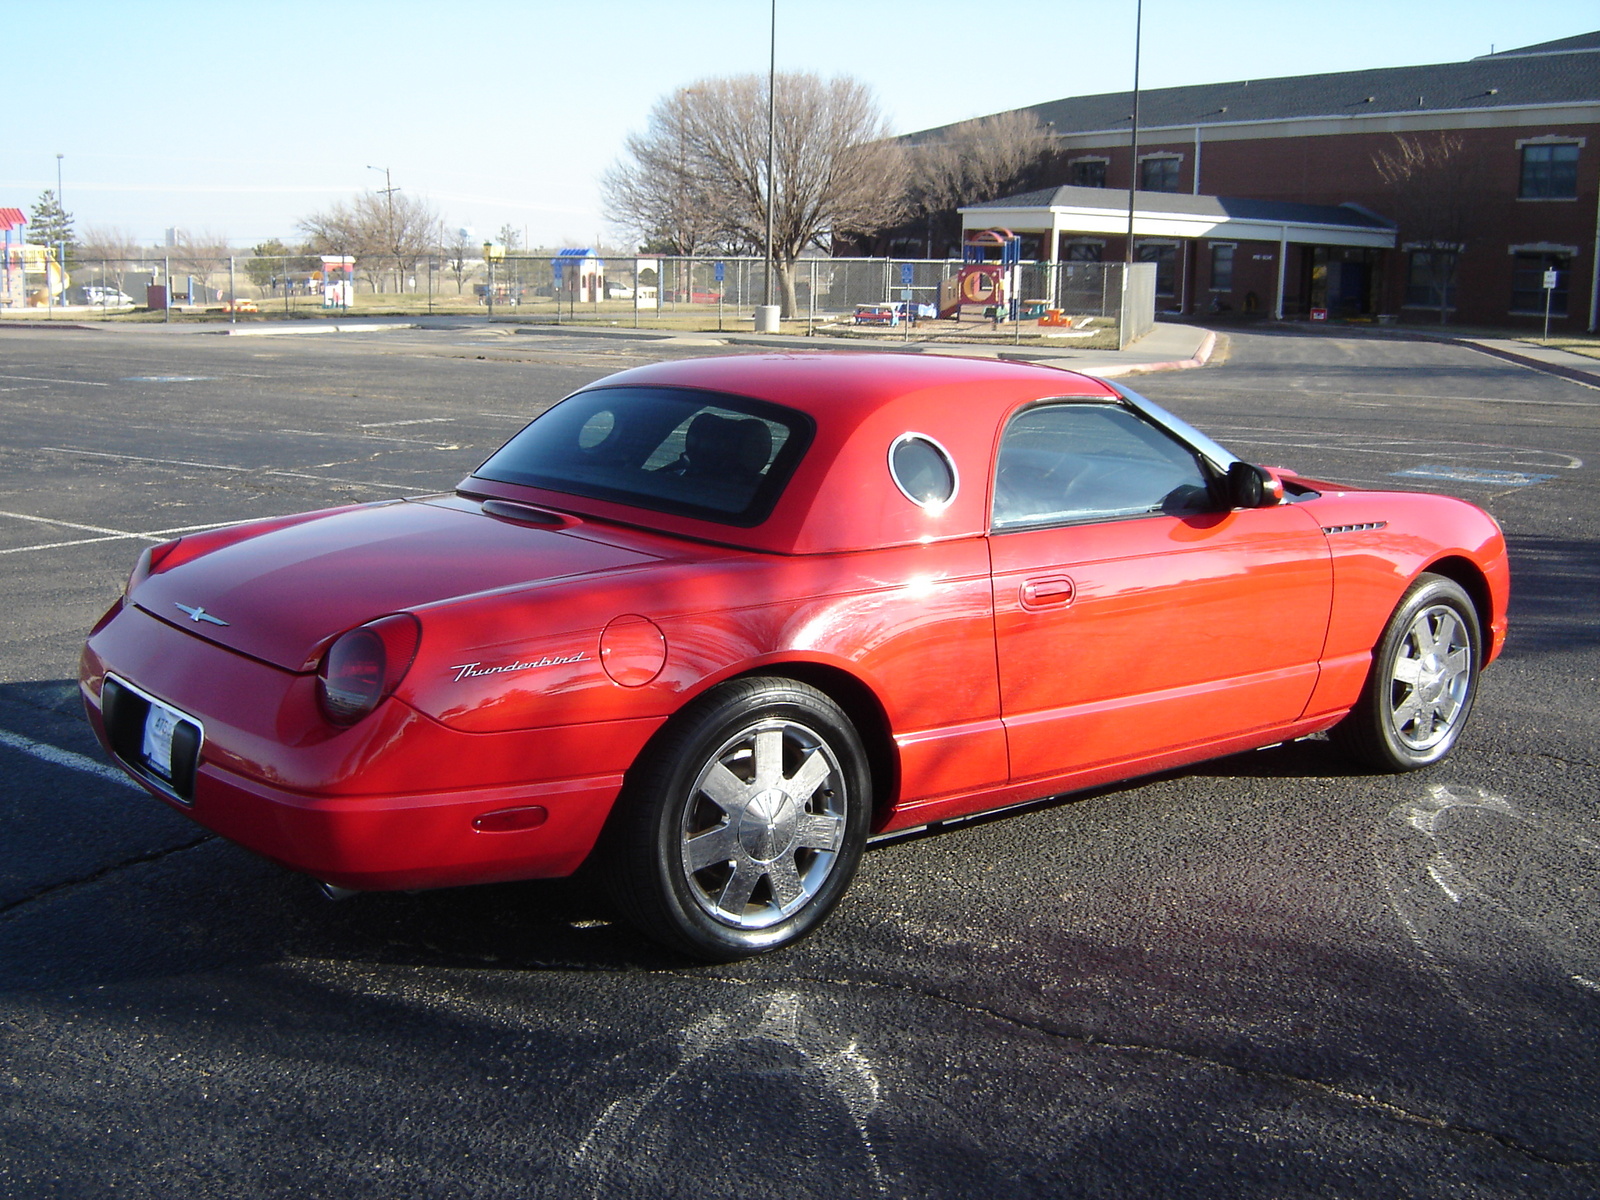 2002 Ford thunderbird convertible review #8